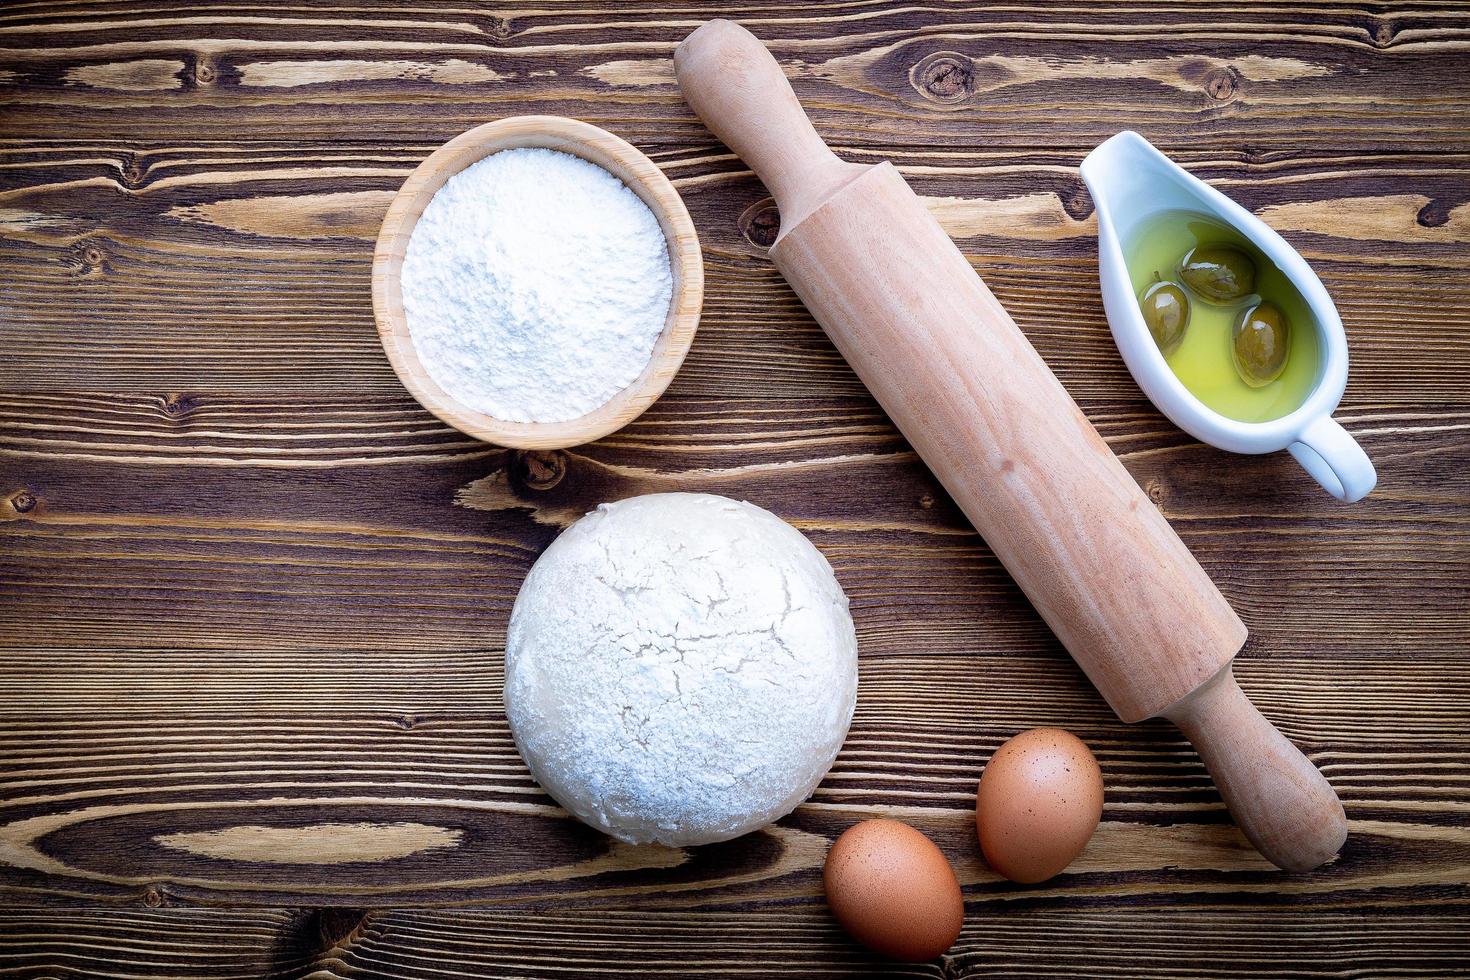 Pizza dough and rolling pin photo